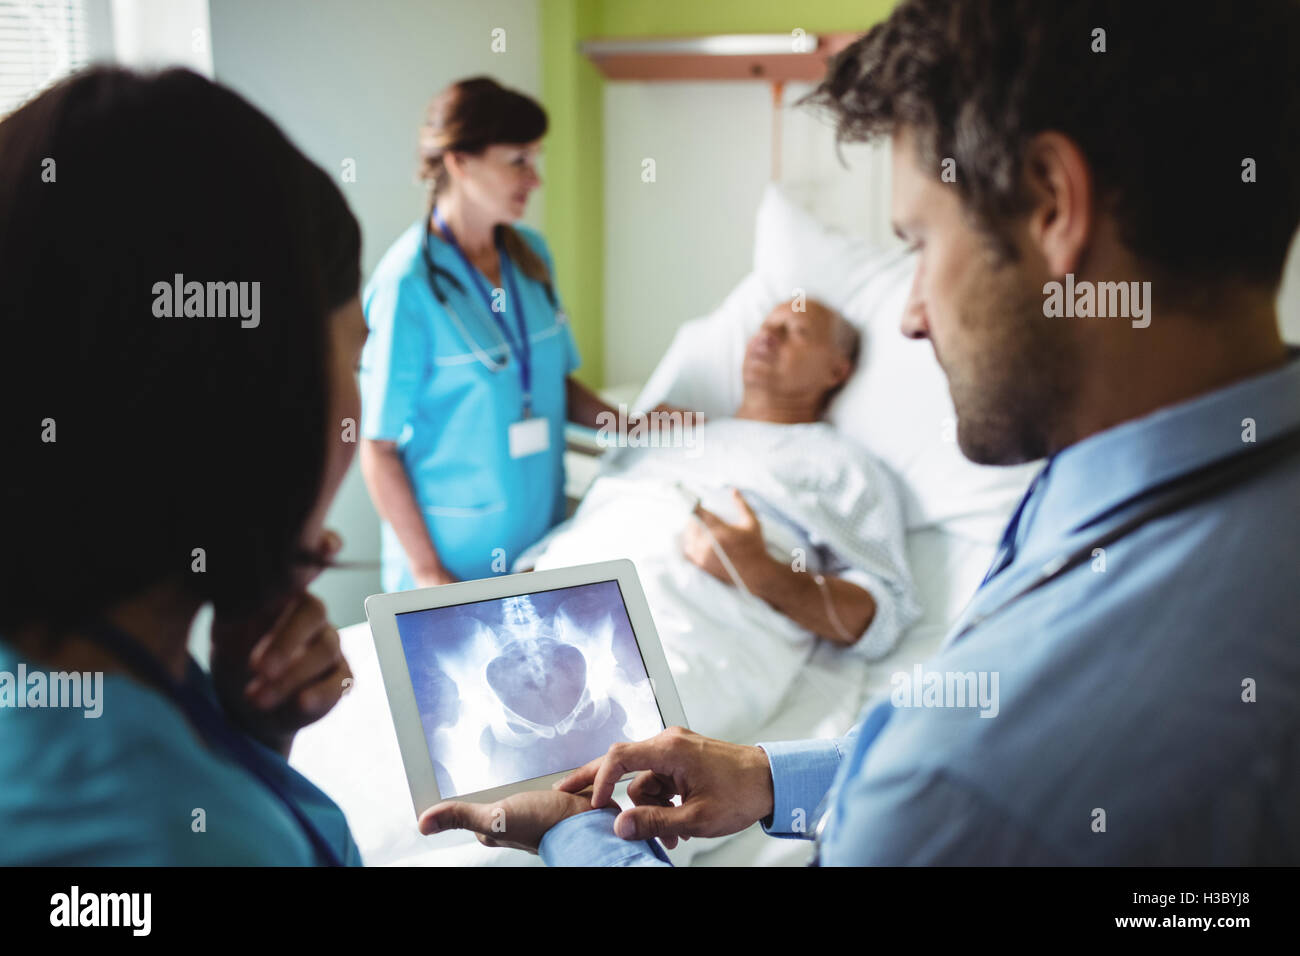 Male doctor and nurse looking at digital tablet Stock Photo